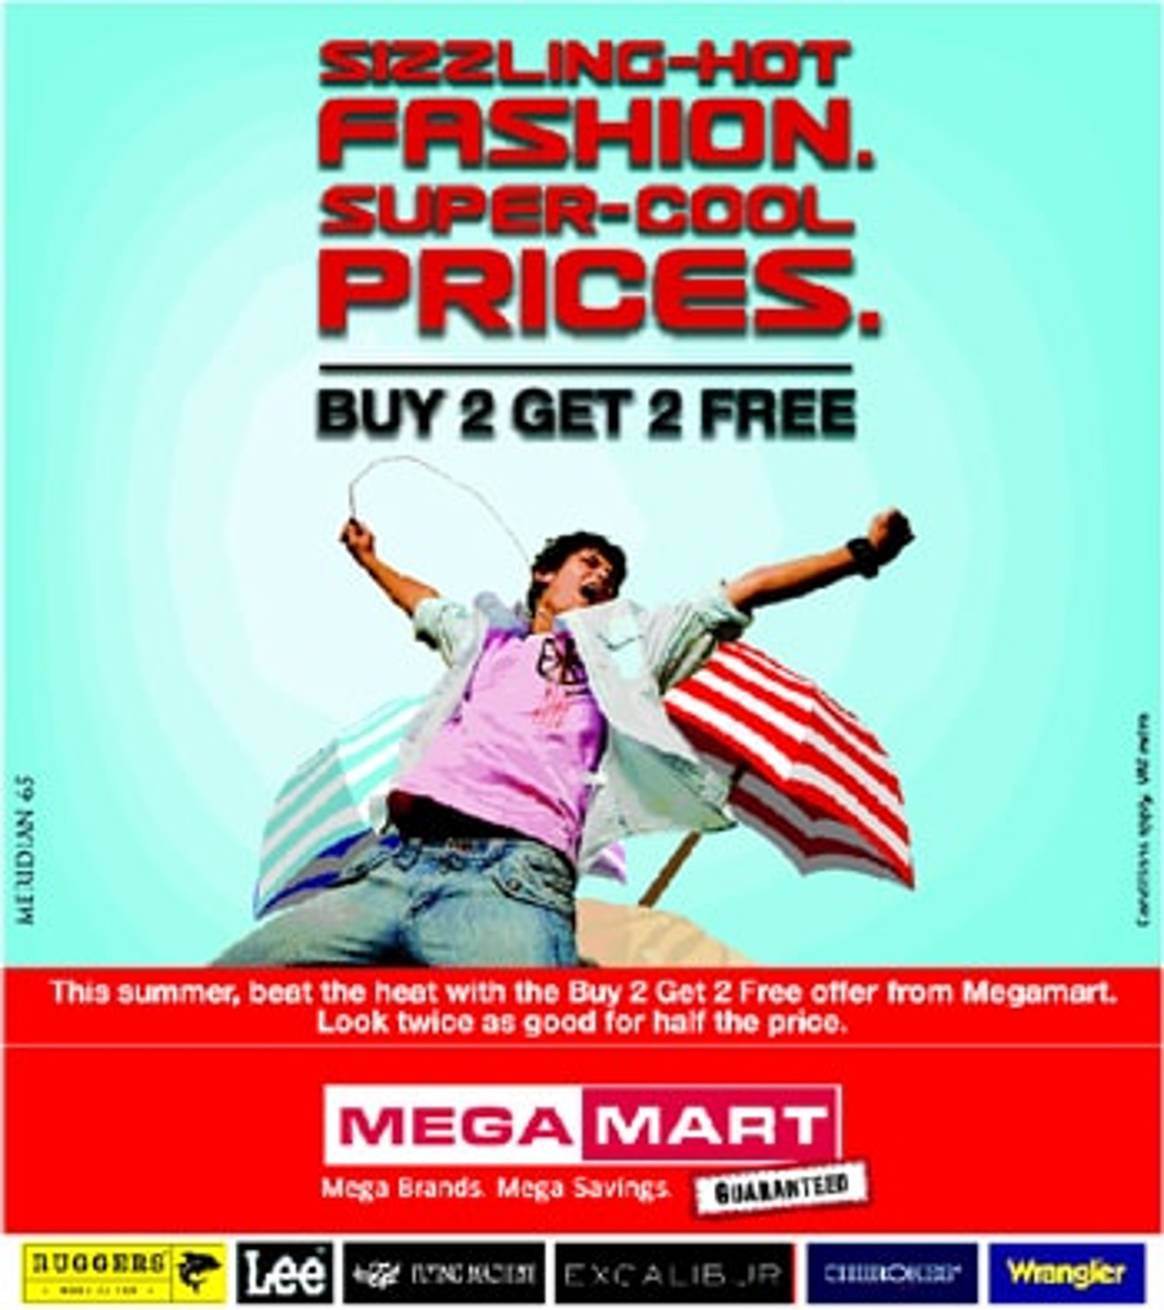 After deep discount, value retail the new success mantra